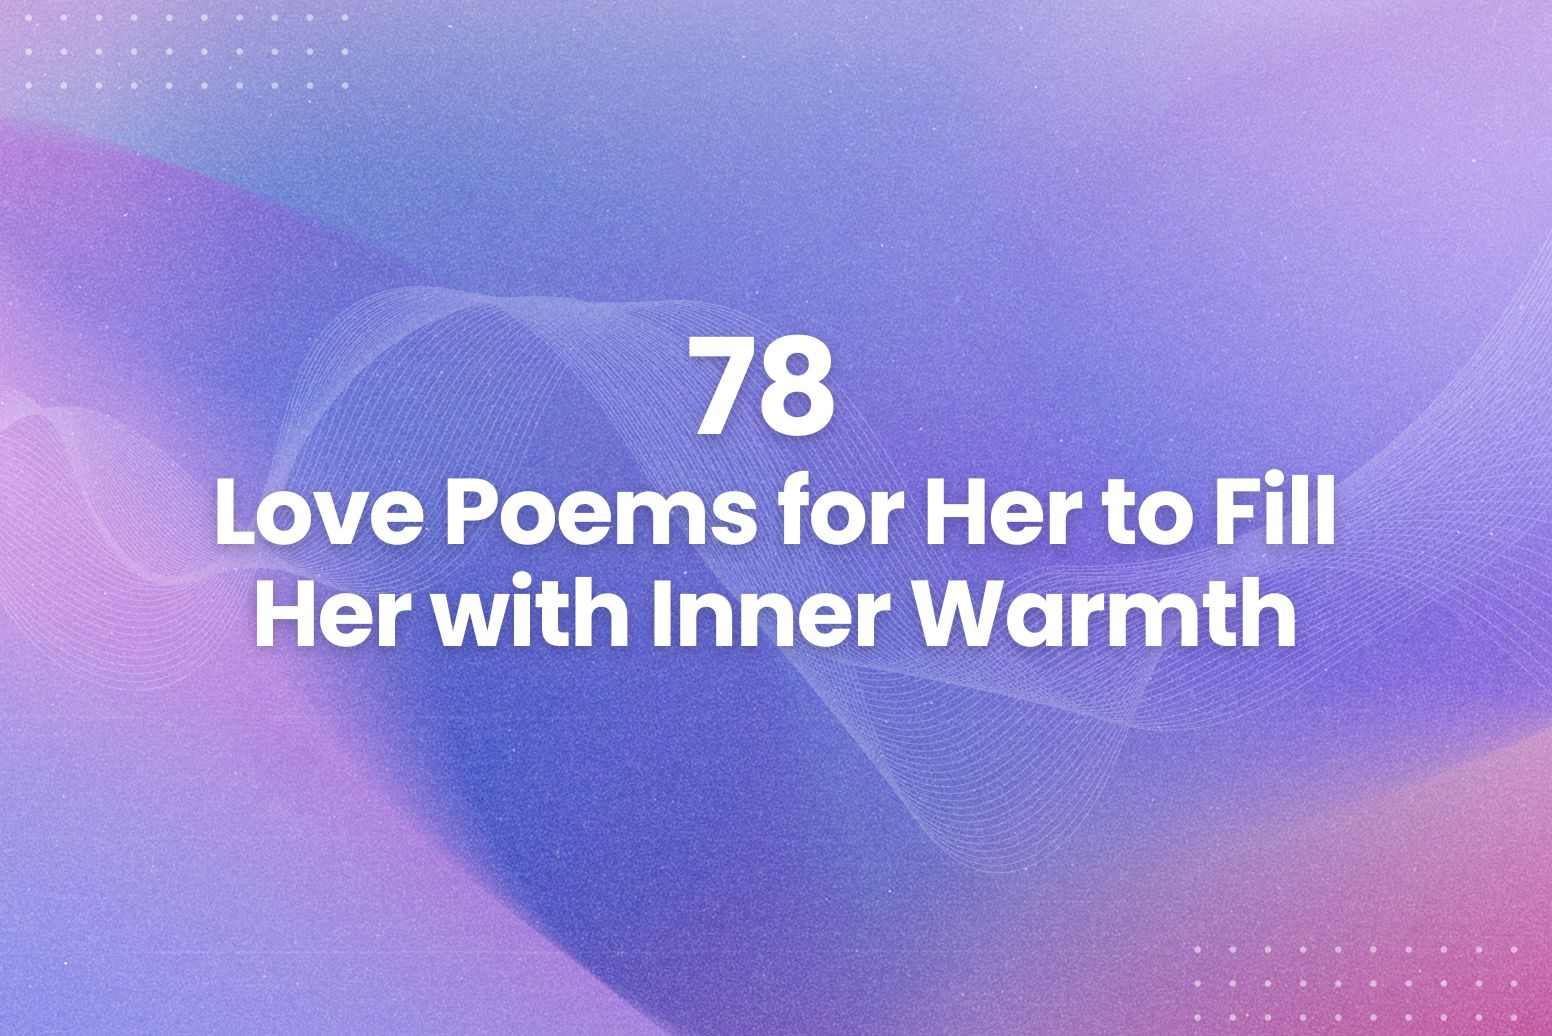 78 Love Poems for Her to Fill Her with Inner Warmth